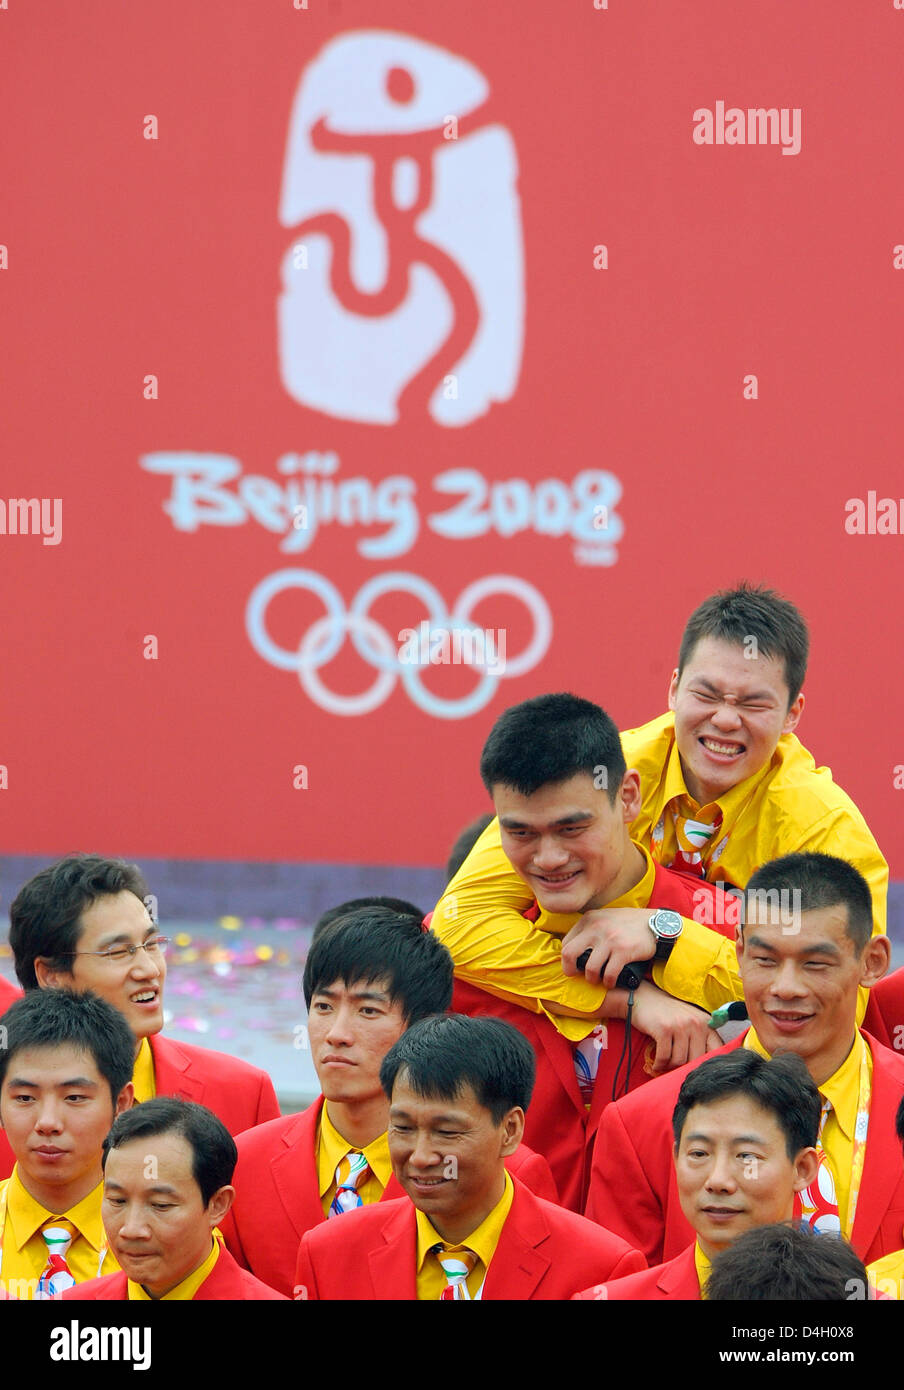 Chinese basketball star Yao Ming (C) and other Chinese athletes are pictured at the opening ceremony of the Olympic village in Beijing, China, 27 July 2008. Some 16,000 athletes, coaches and officials will live in 42 buildings in the Olympic village. The Beijing 2008 Olympic Games will run from 08 until 24 August in China. Photo: Gero Breloer Stock Photo